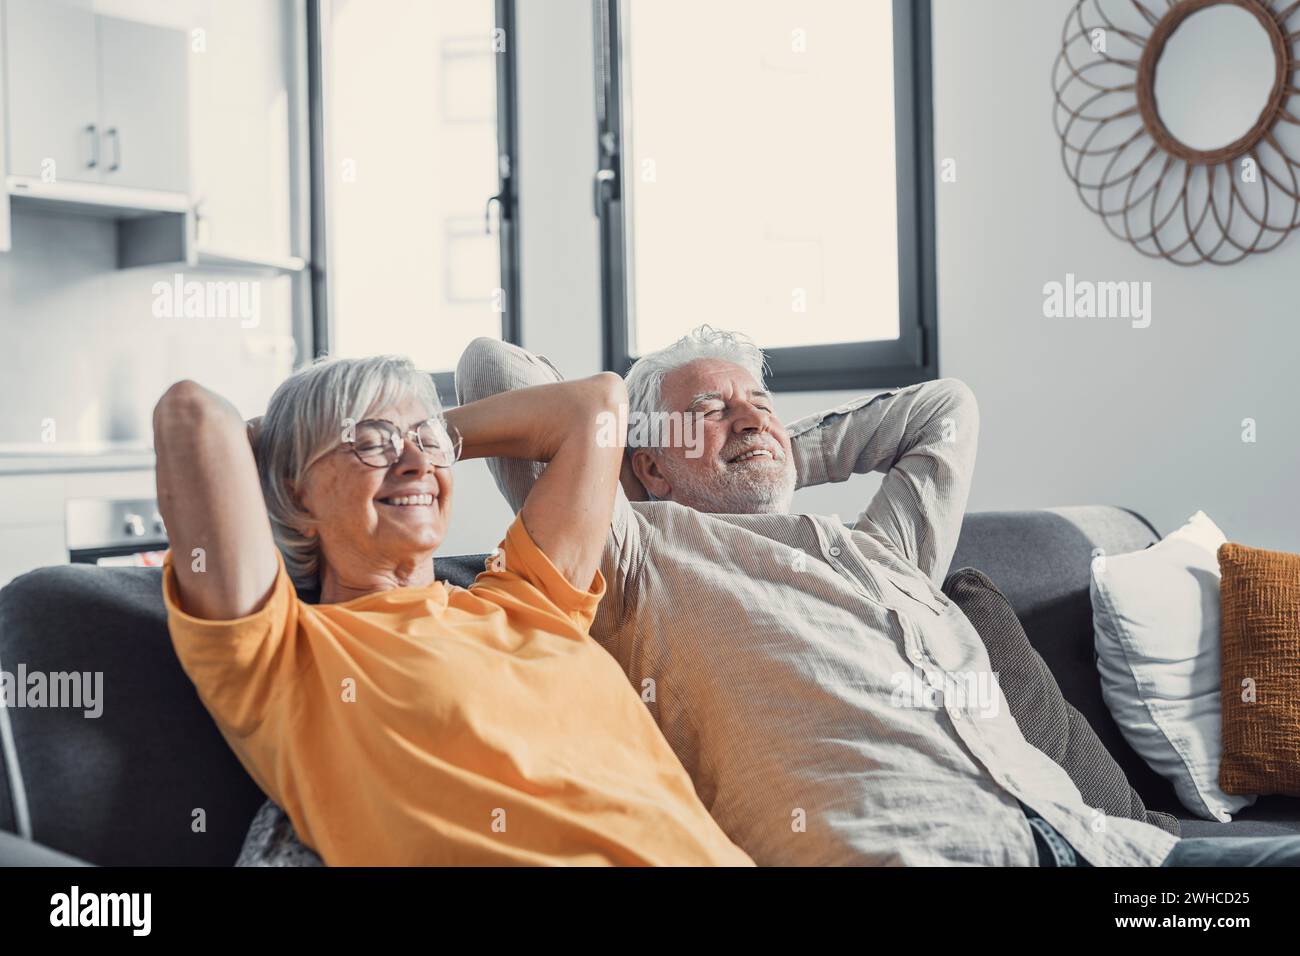 Peaceful middle aged man and woman with closed eyes relaxing on comfortable couch at home, mature family daydreaming together, grey haired wife and husband resting with hands behind head, breathing Stock Photo